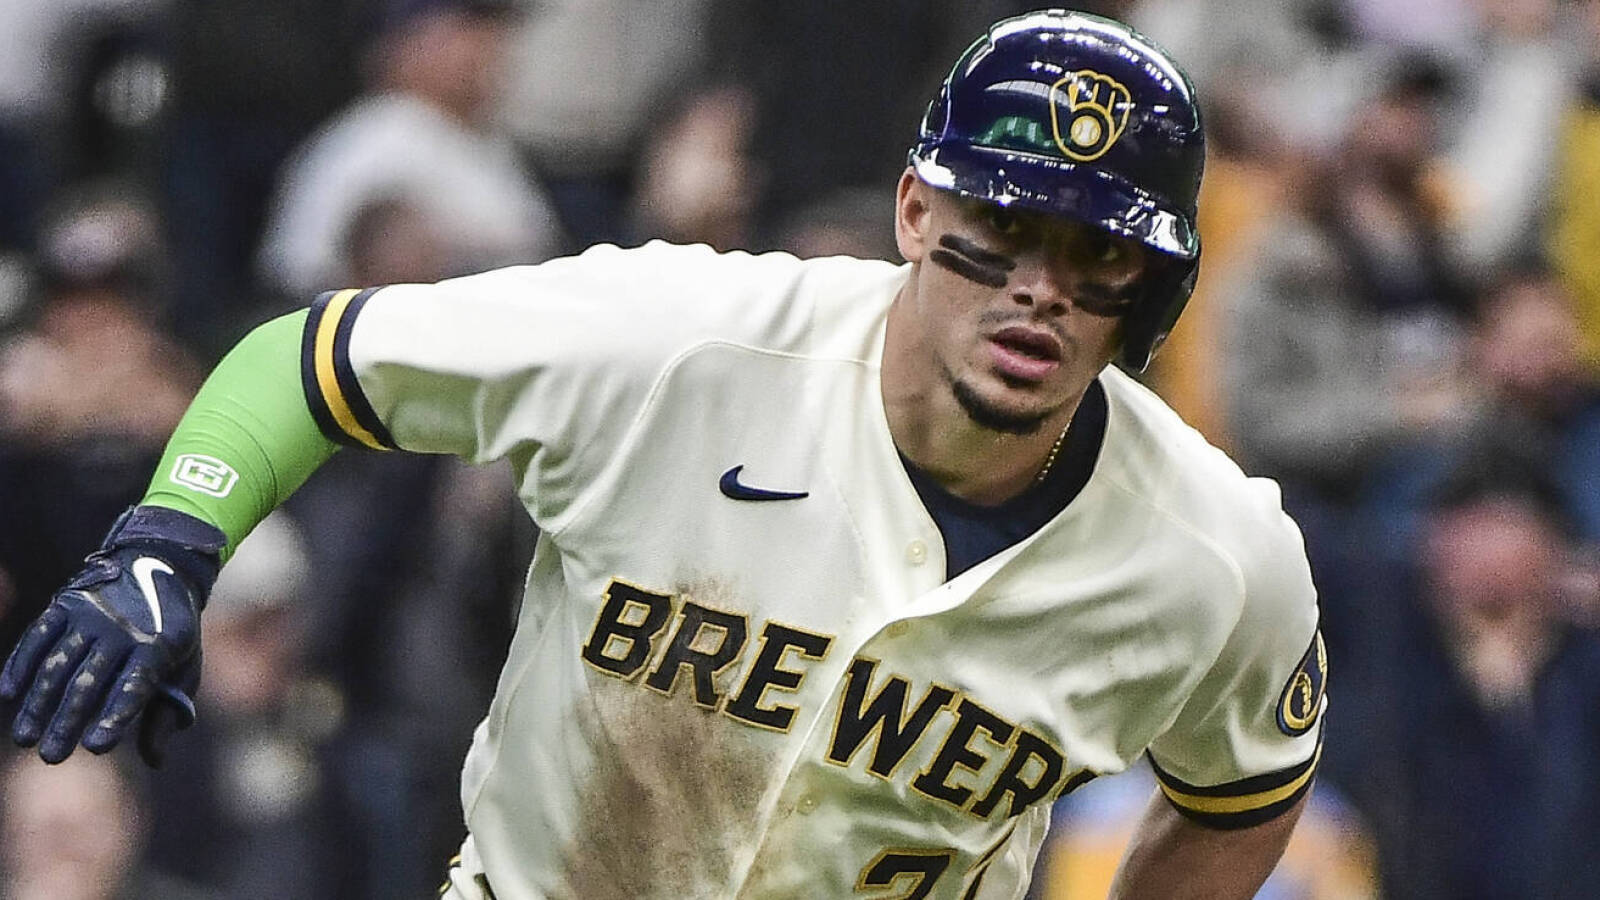 Brewers' Willy Adames taken to hospital, heading to IL after